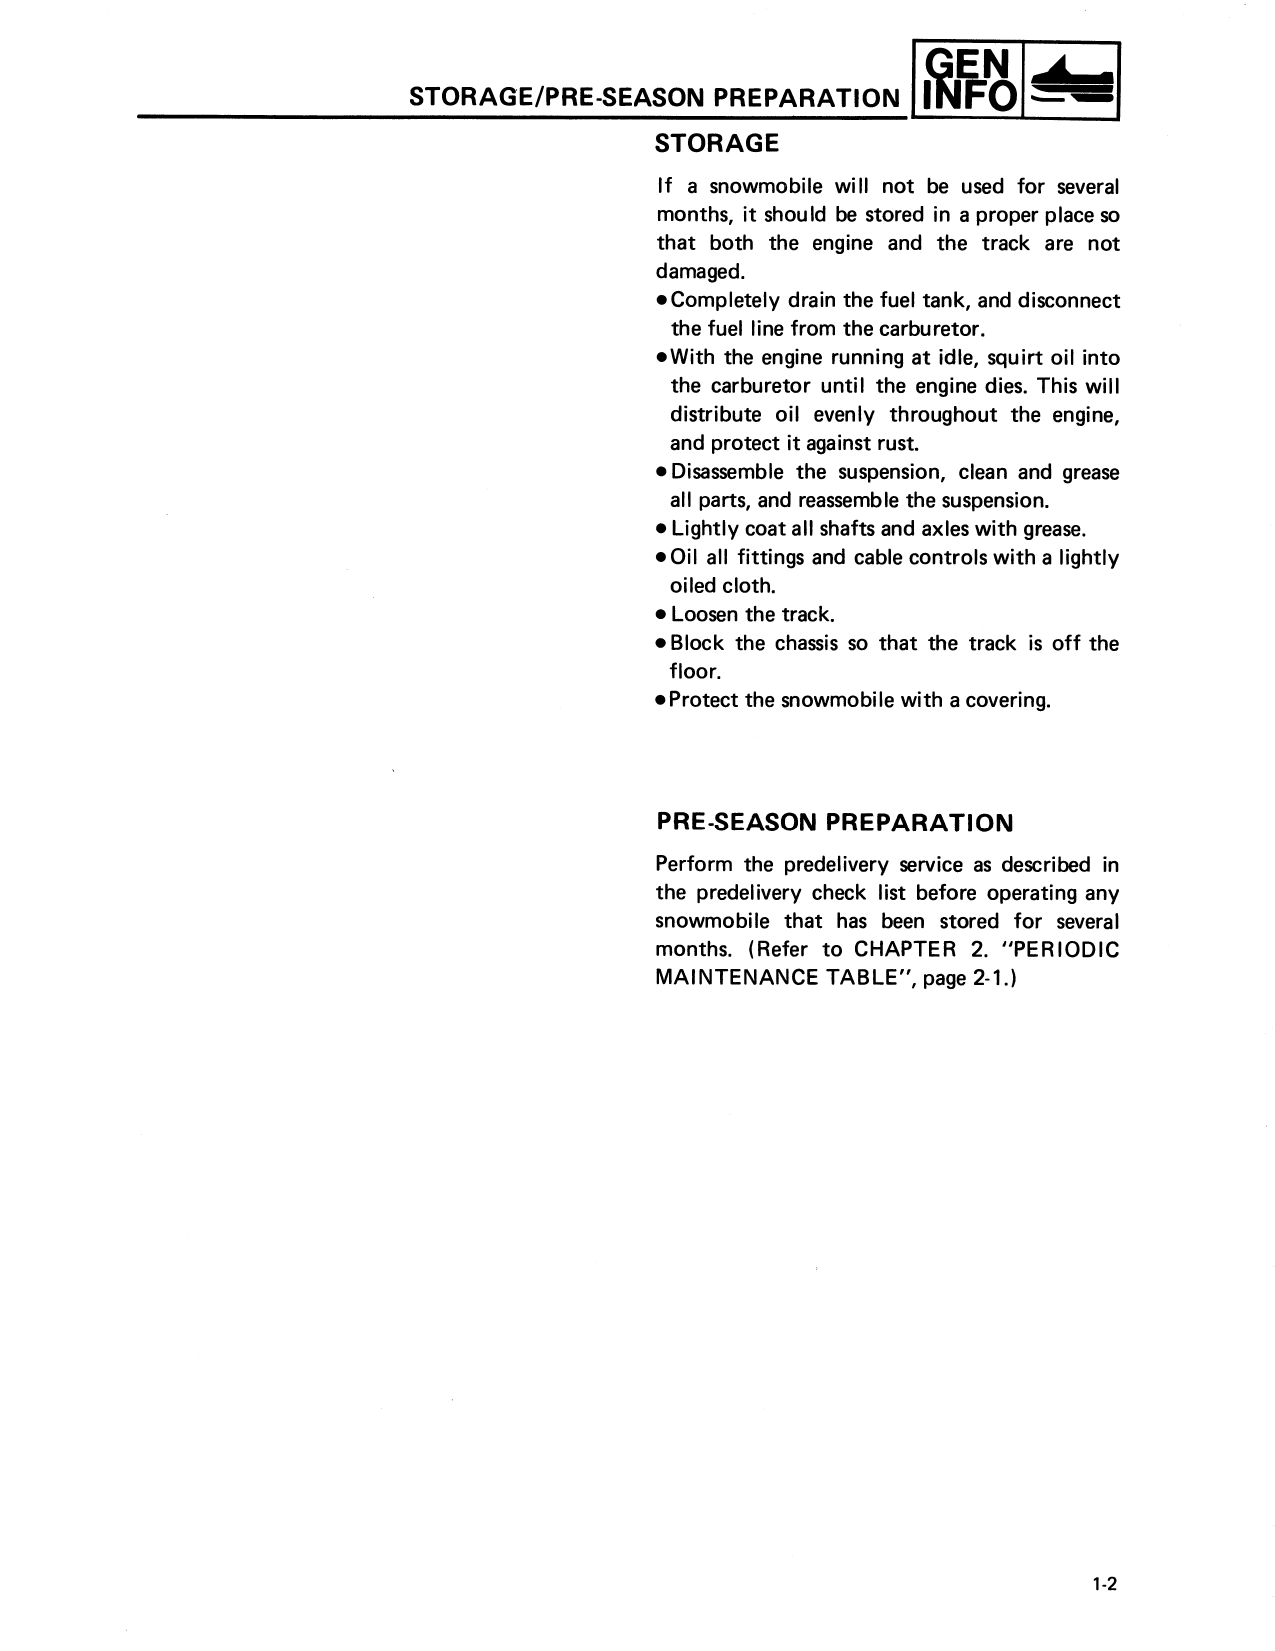 1986-1990 Yamaha Inviter 300, CF300 snowmobile service manual Preview image 5